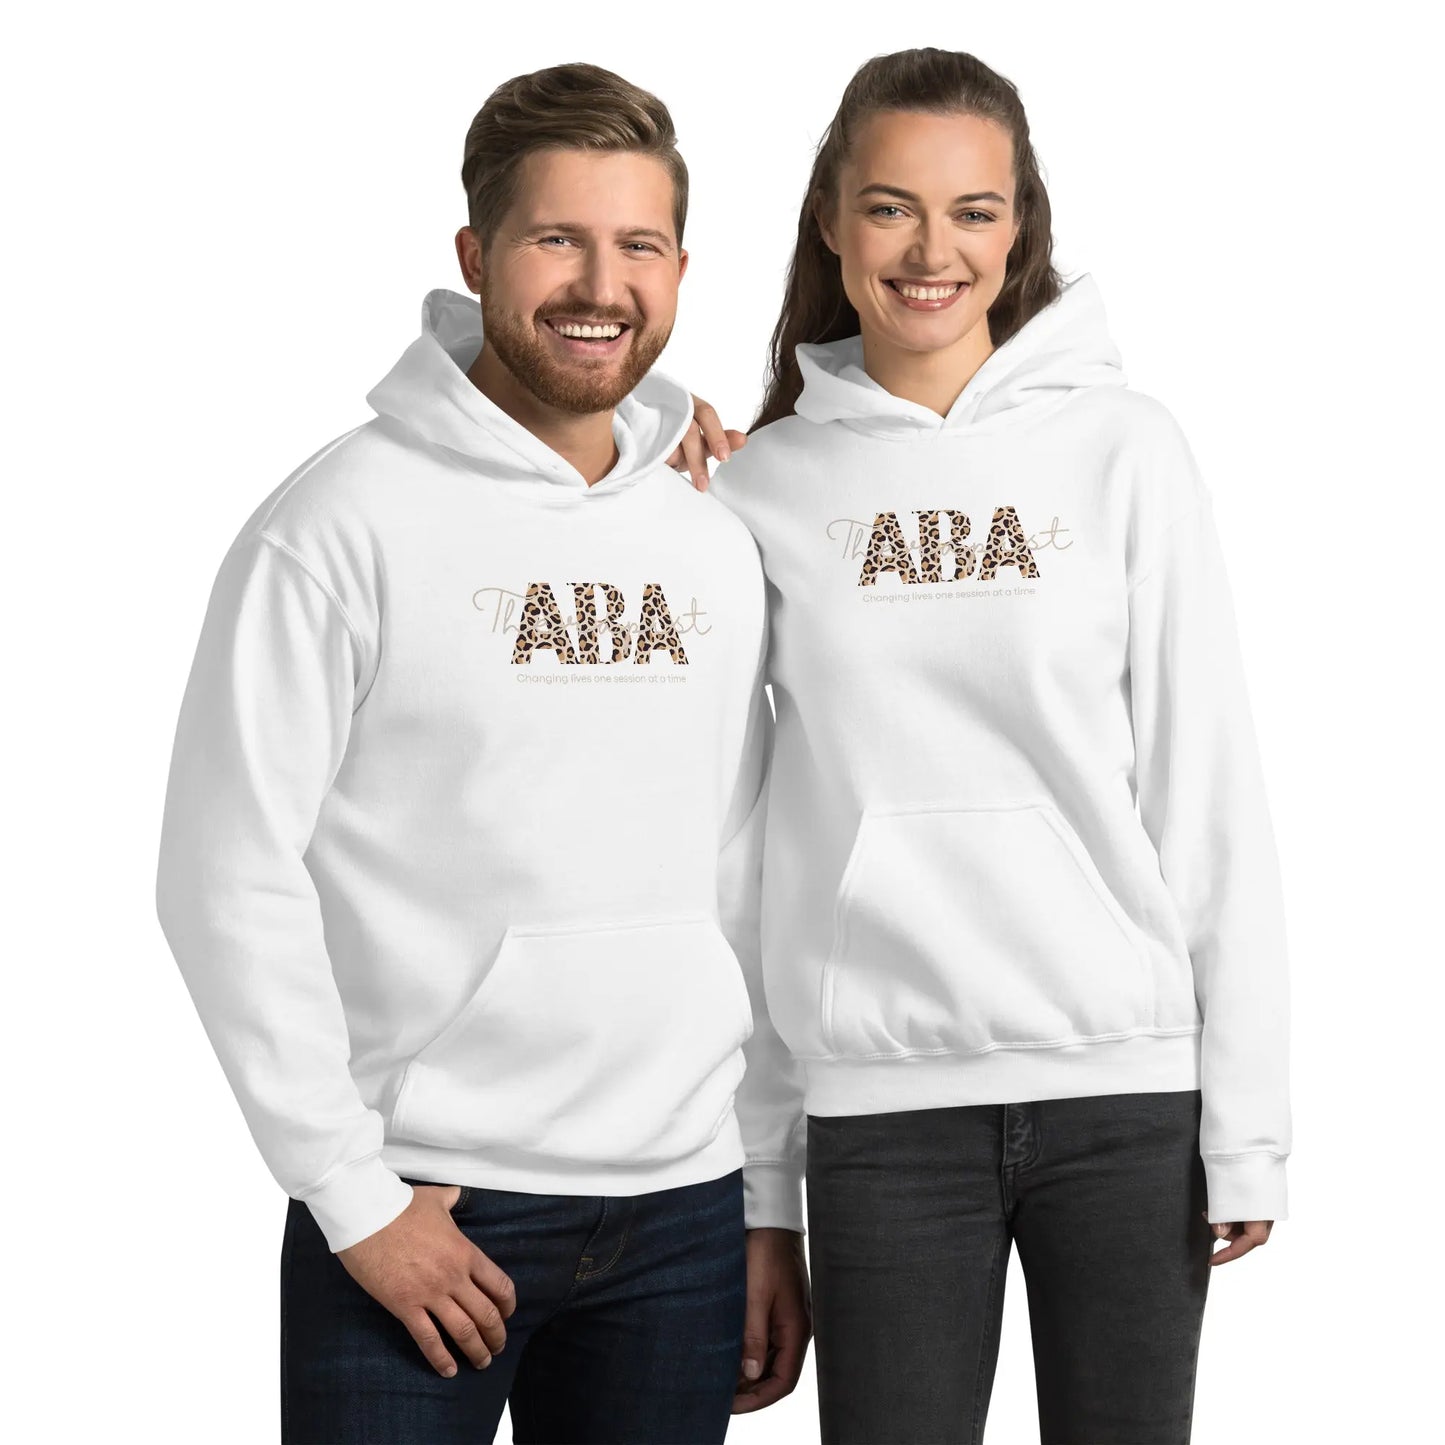 Behavior Therapist Hoodie ABA Therapist Sweater Stay Warm & Stylish in this ABA Therapist Gift Hoodie Making a Difference with Every Session Affordable ABA Materials